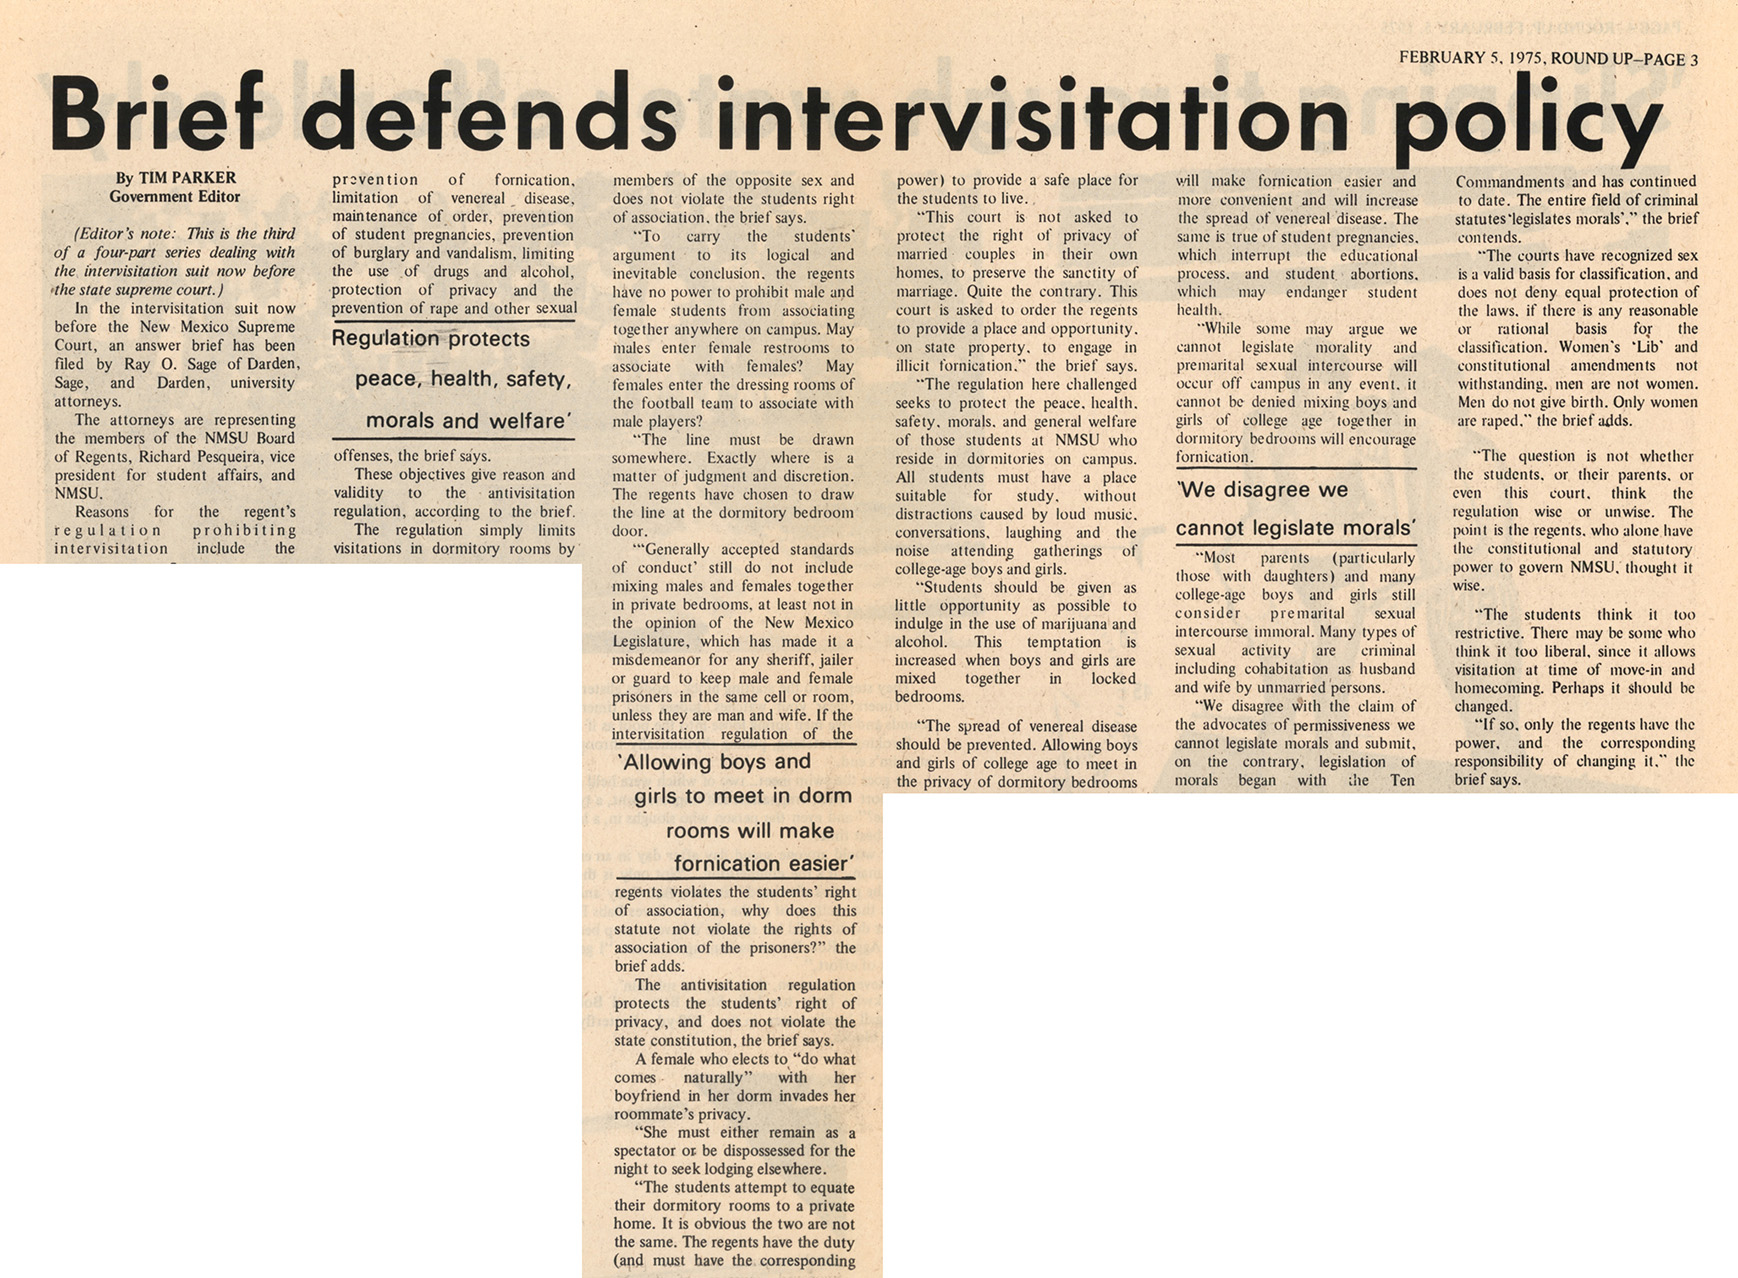 newspaper clipping of article titled Brief defends intervisitation policy